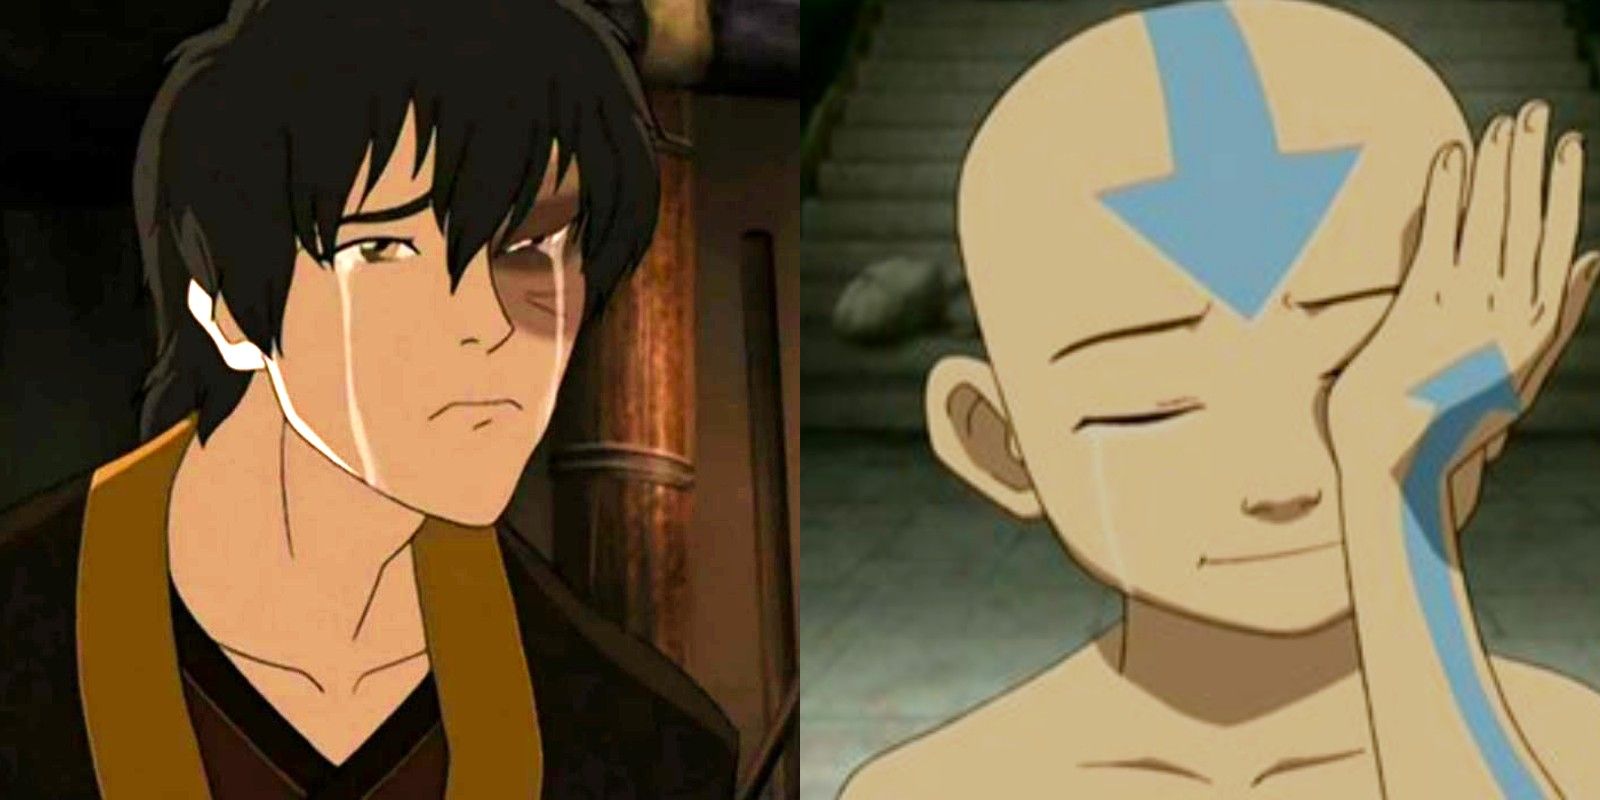 Split image: Zuko and Aang crying big boo-hoo tears in scenes from Avatar: The Last Airbender.